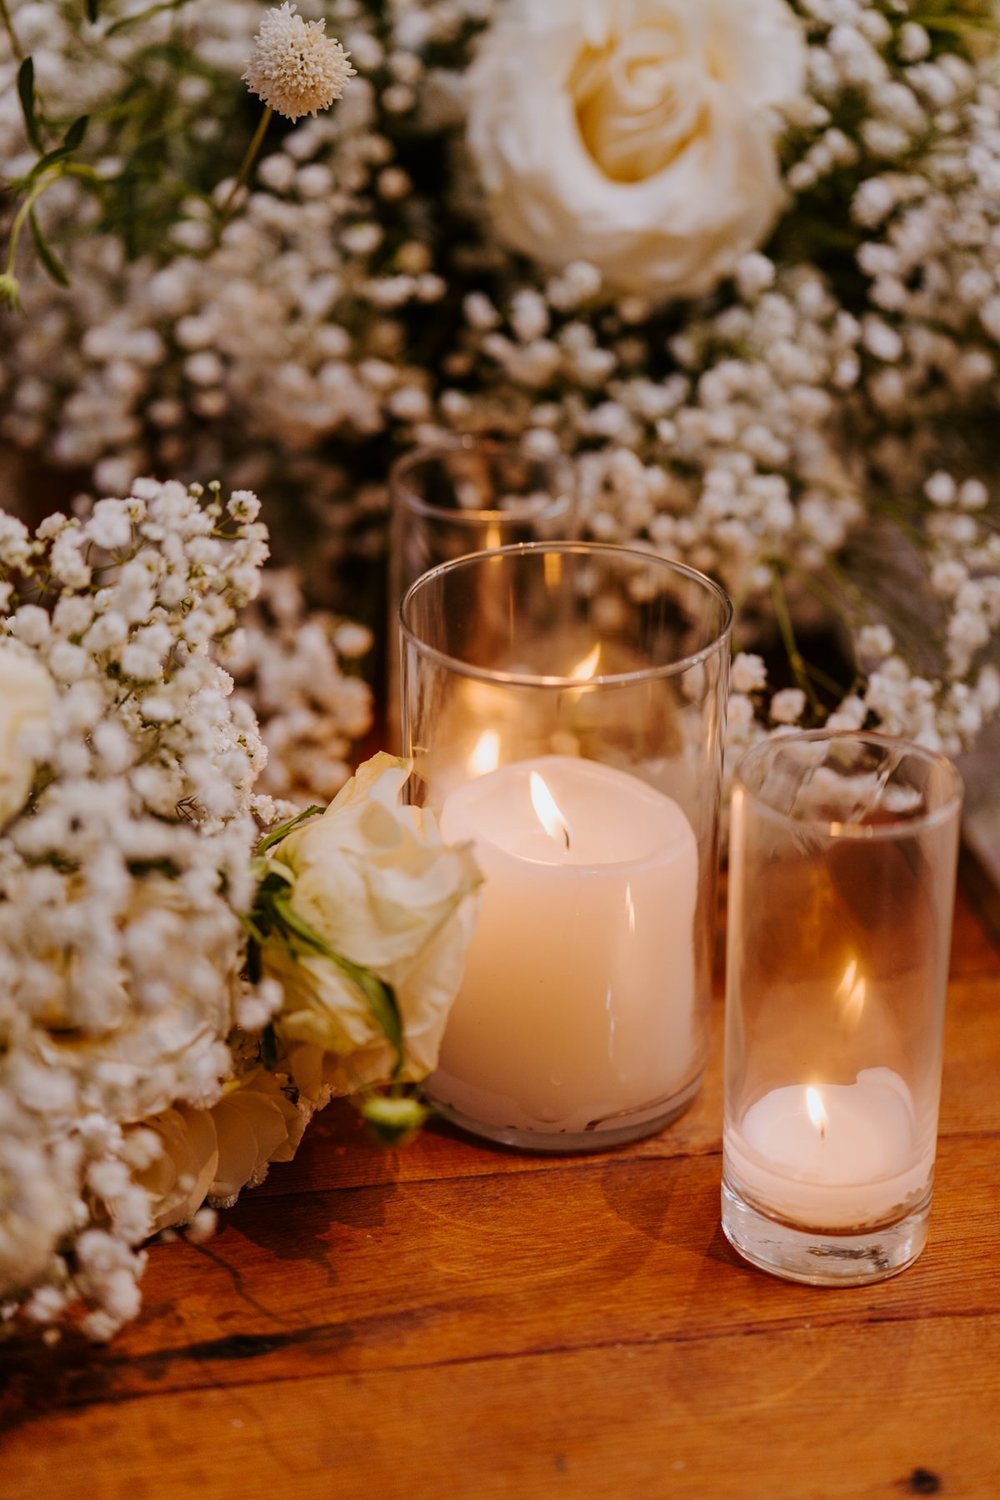 Baby’s breath and votiv candle wedding reception centerpiece, whimsical wedding, grass room dtla, photo by Tida Svy, Los Angeles Wedding Photographer